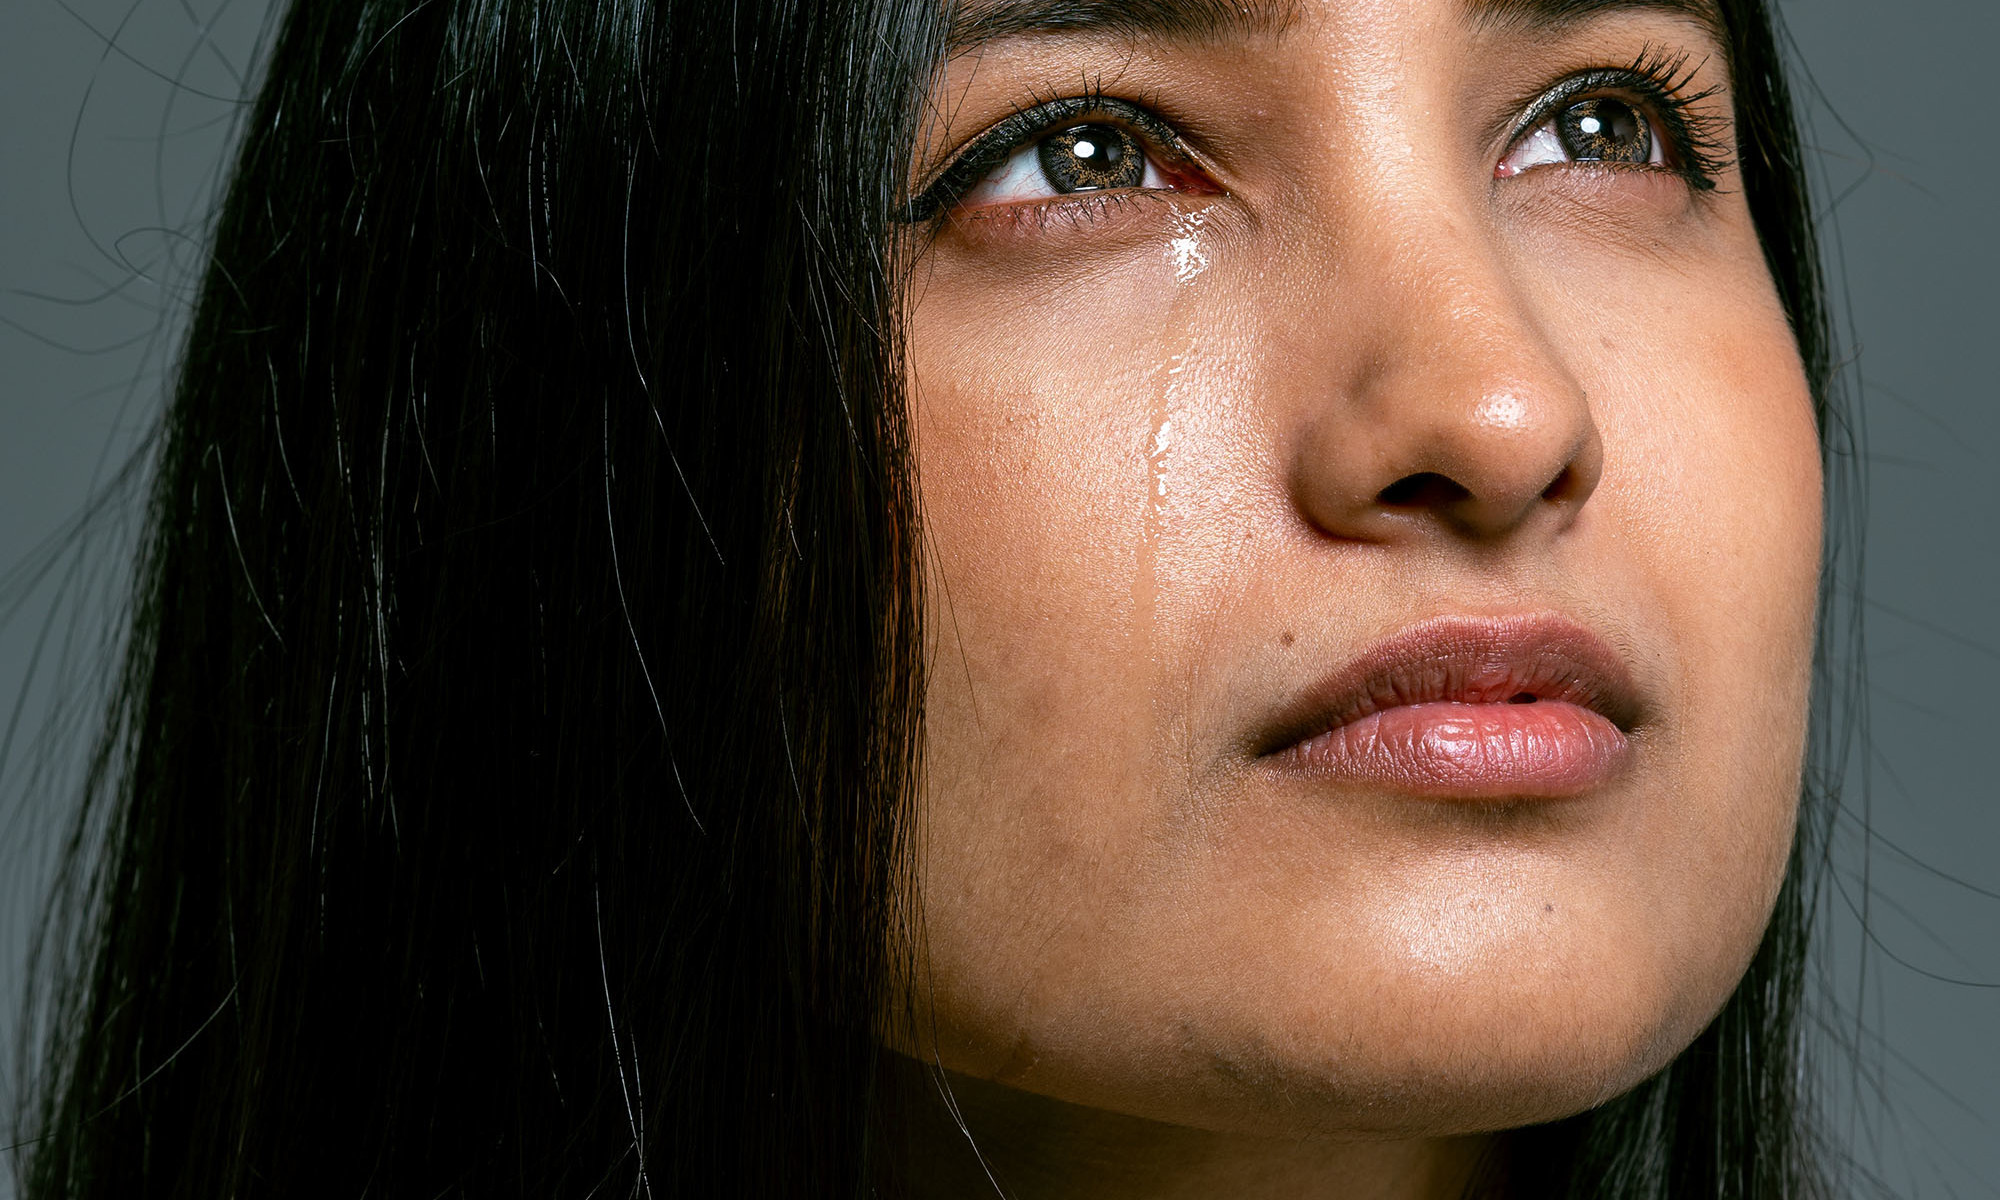 What Are Tears Made Of and Why Do We Cry?​